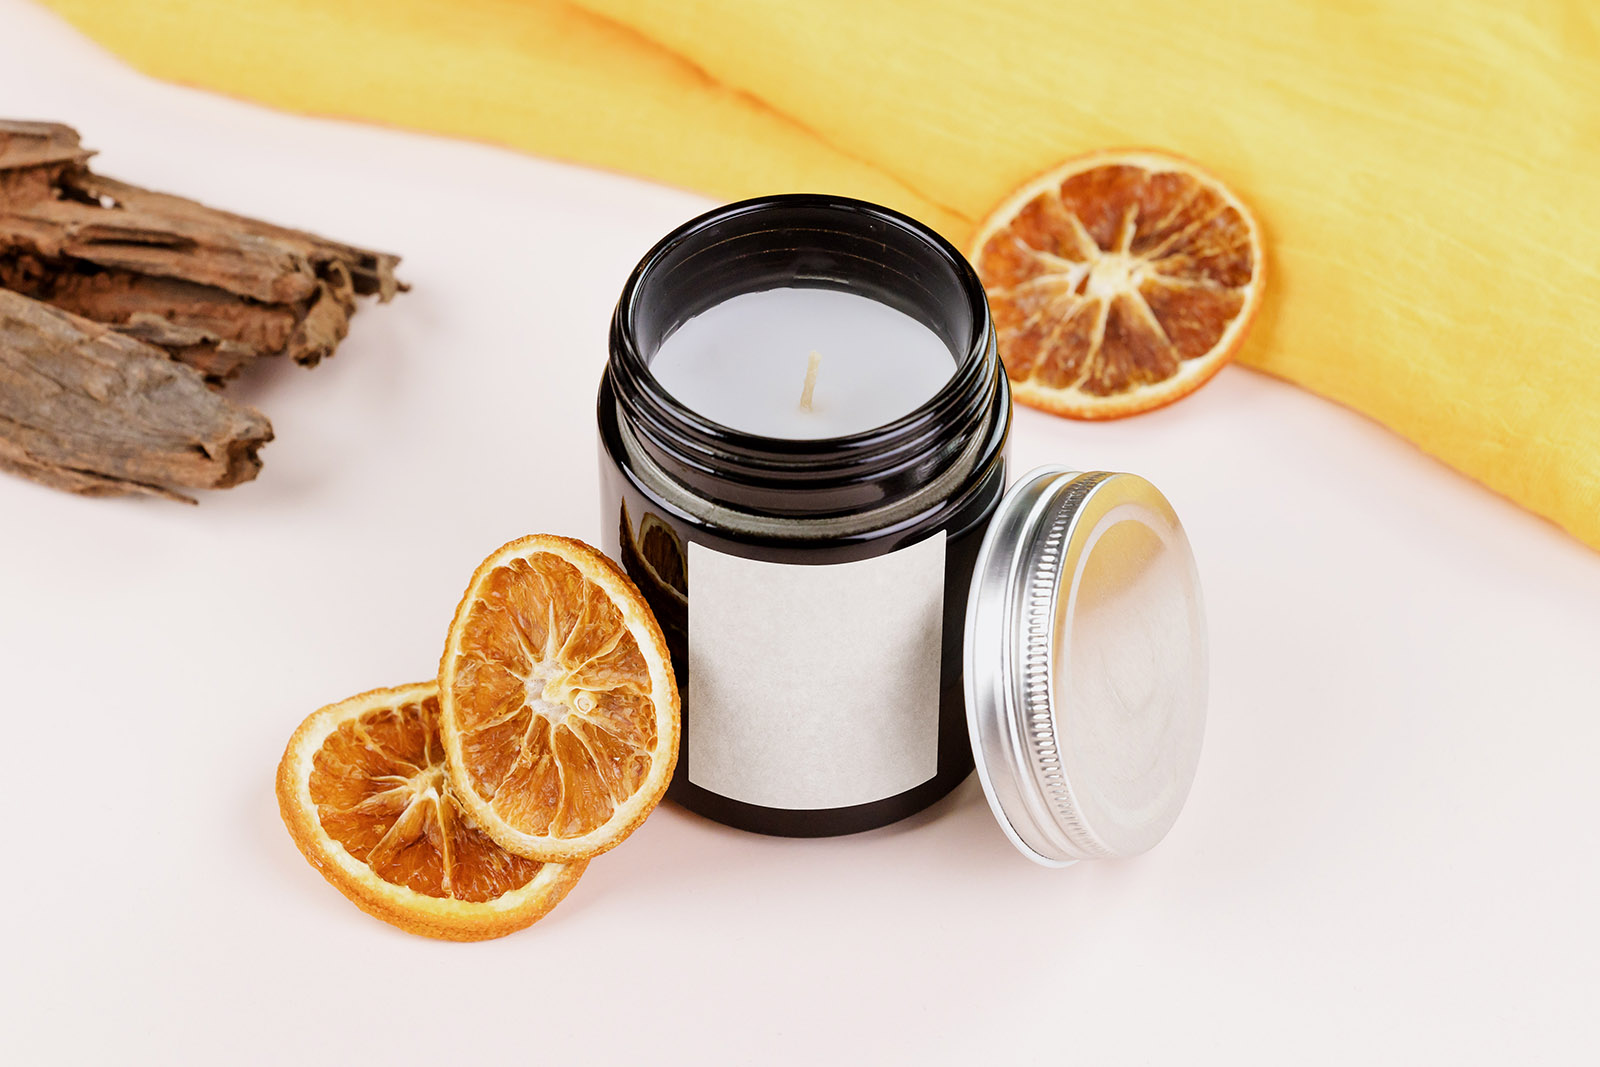 Candle with dried oranges mockup